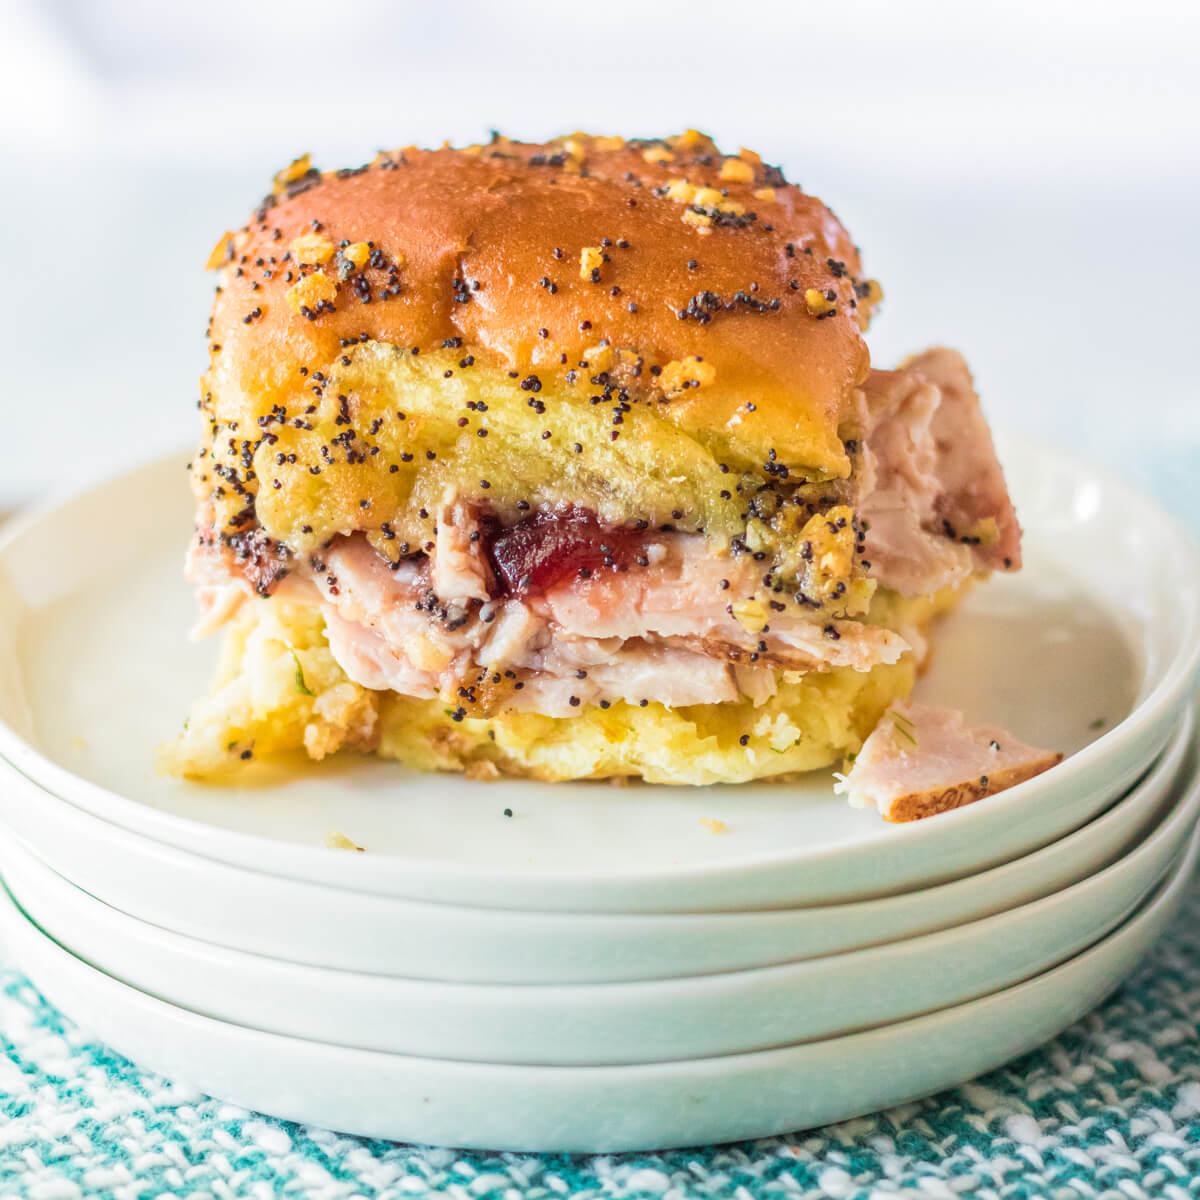 A golden baked Turkey Dinner slider in a Hawaiian Roll on a stack of white plates.